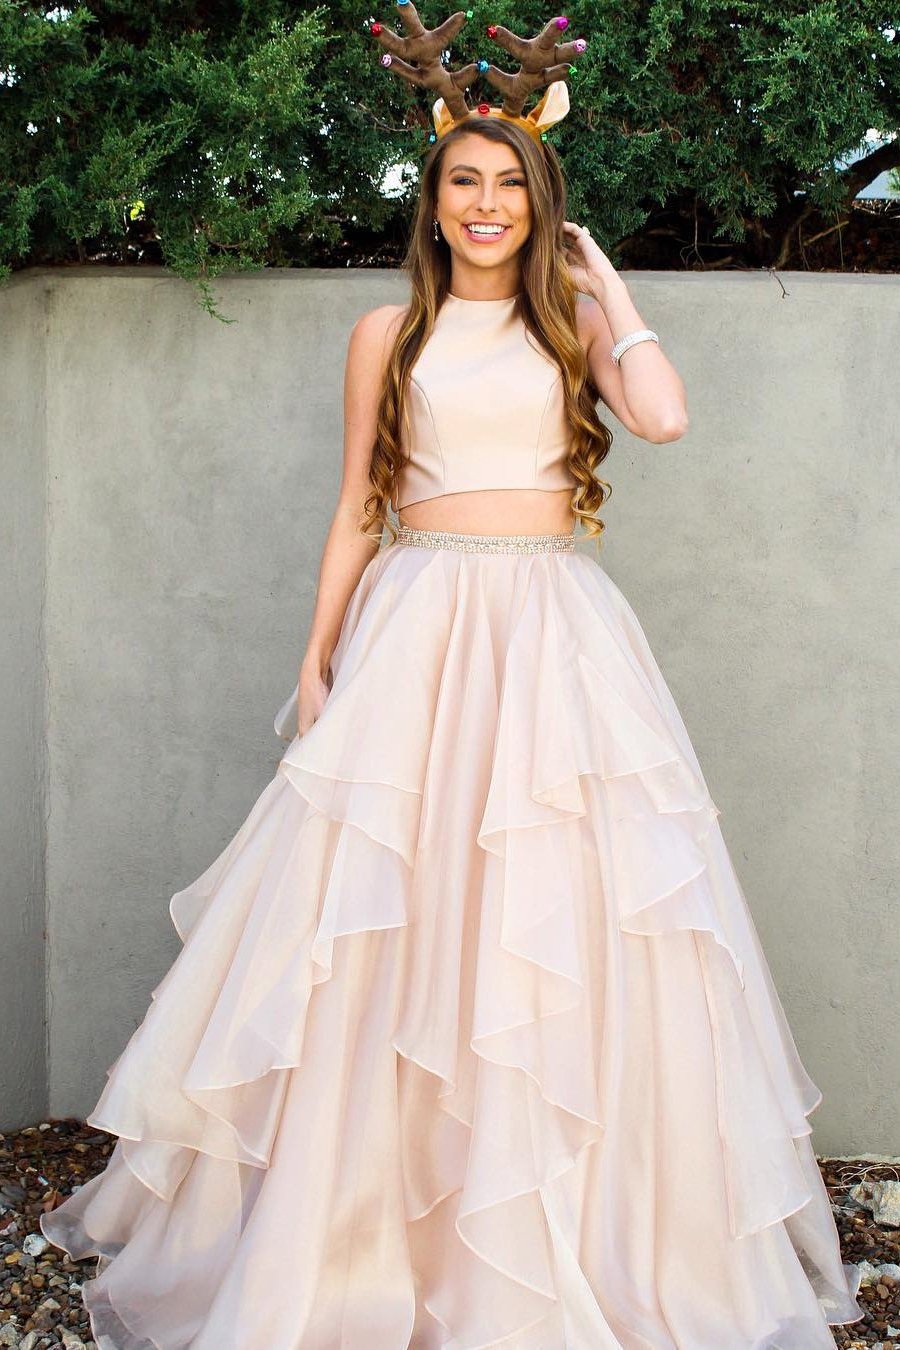 Two Piece A-line High Neck Beads Organza Long Sparkly Chic Evening Prom Dresses UK JS474